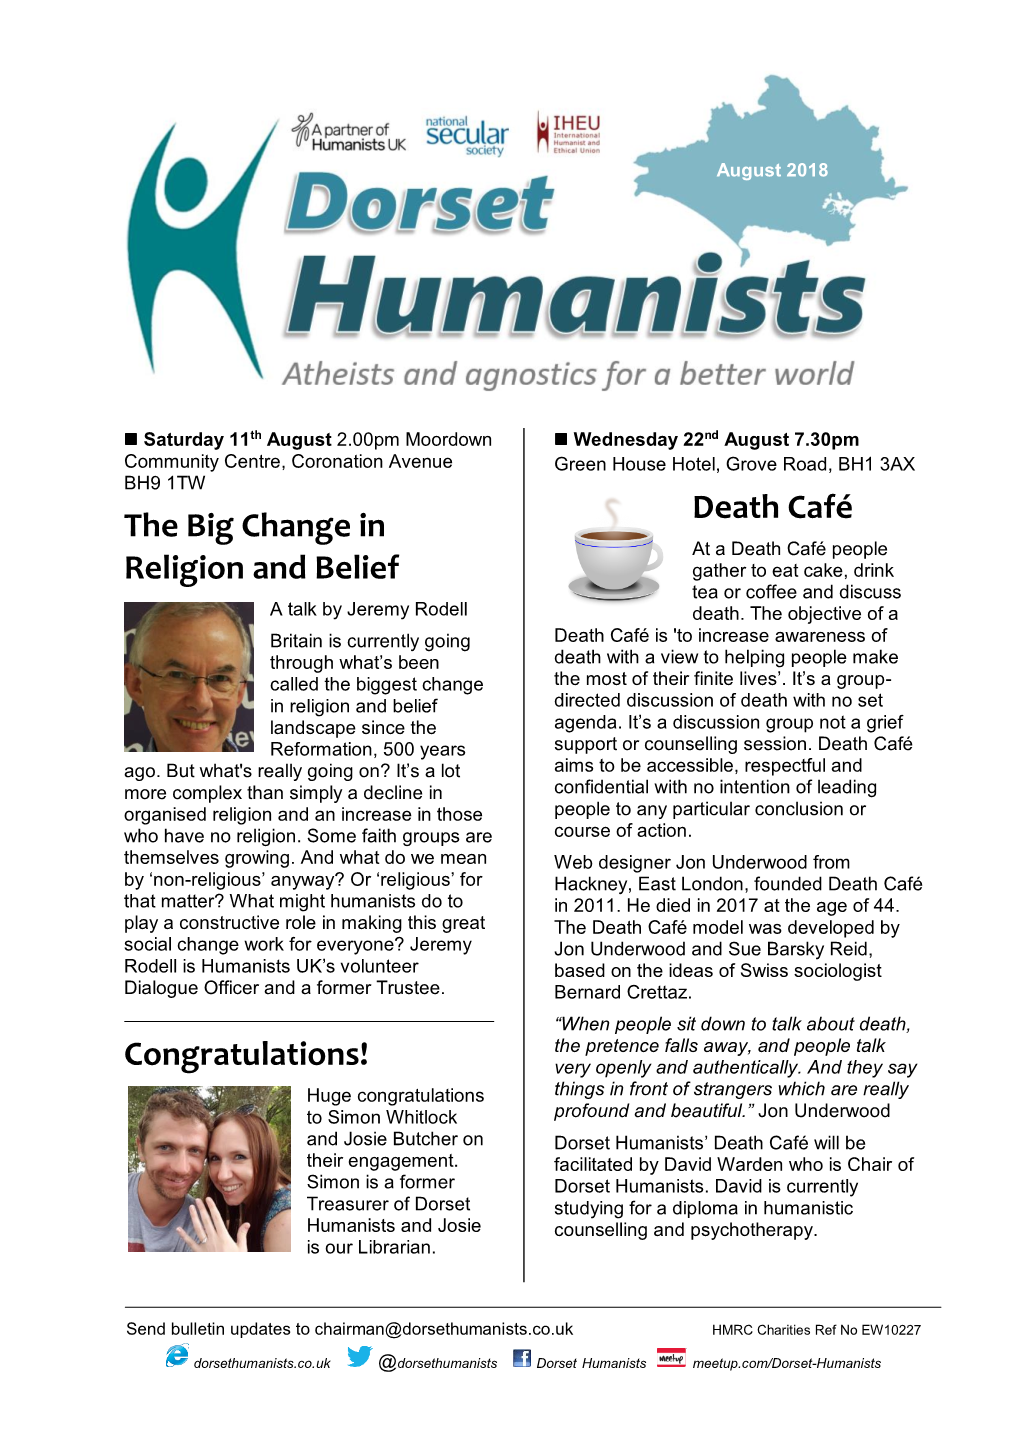 Dorset Humanists’ Death Café Will Be Their Engagement